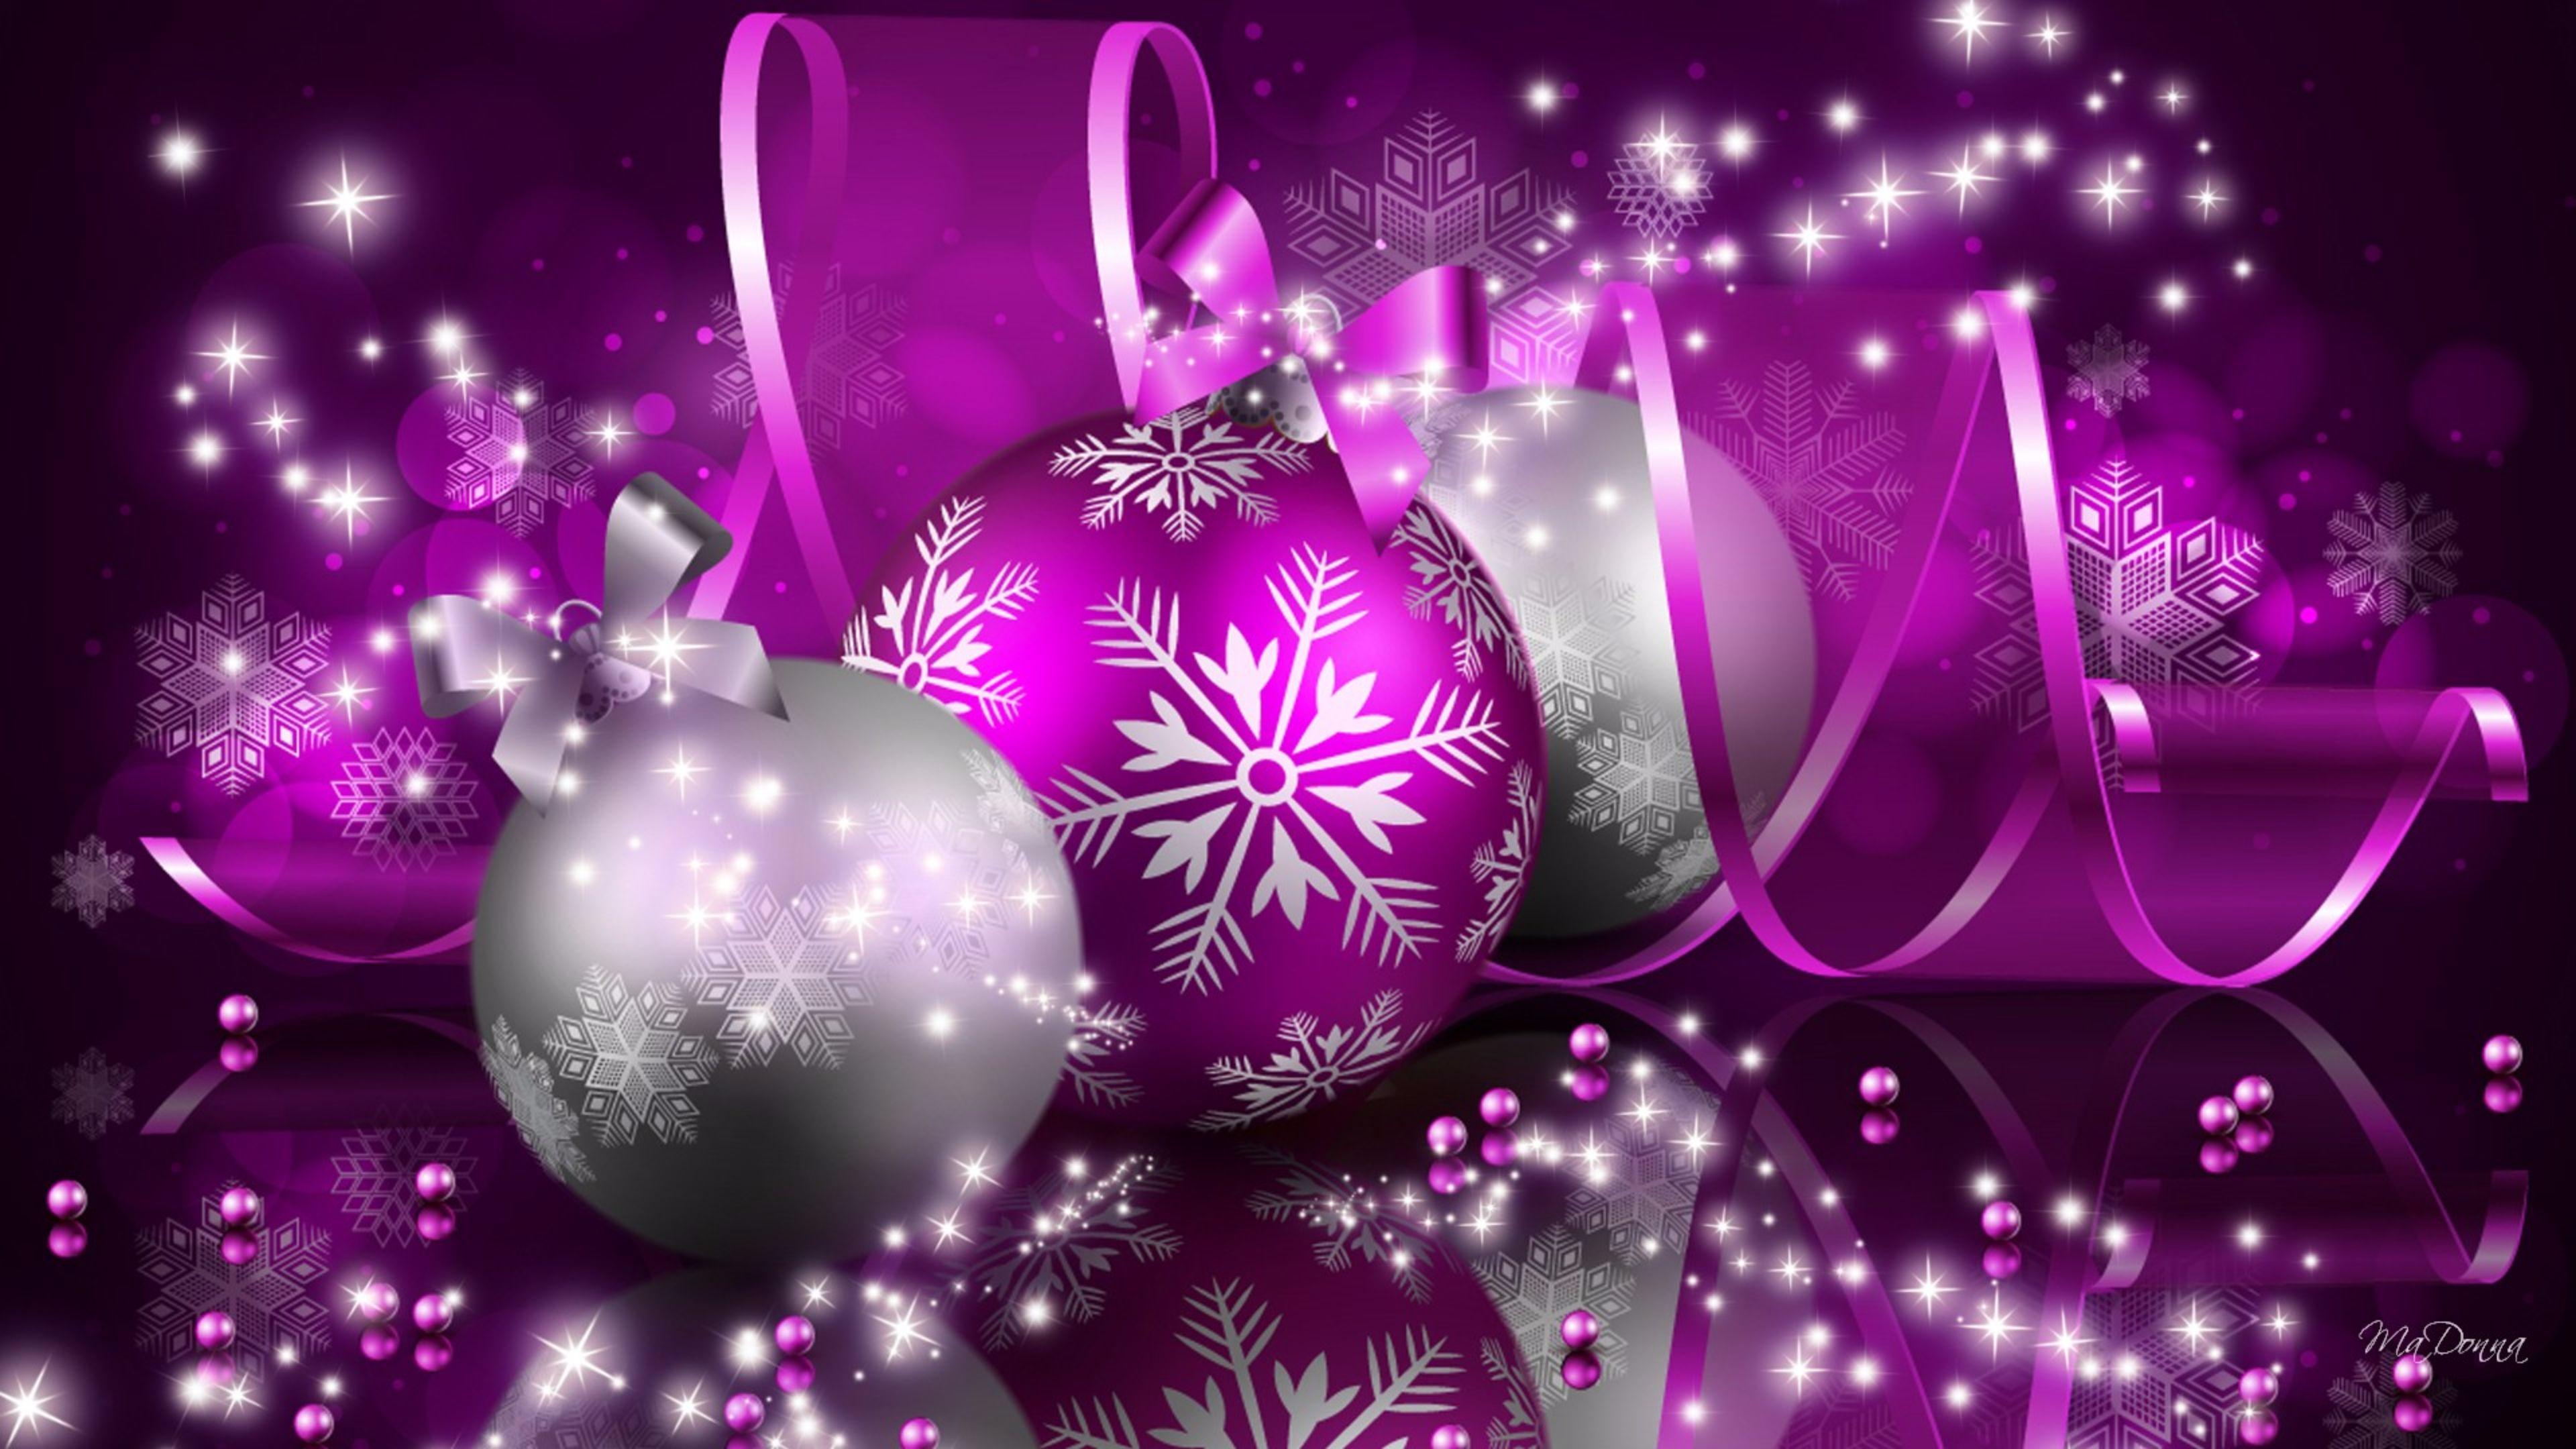 Merry Christmas Purple Decorations 4k Wallpapers 3840x2160 : Wallpapers13